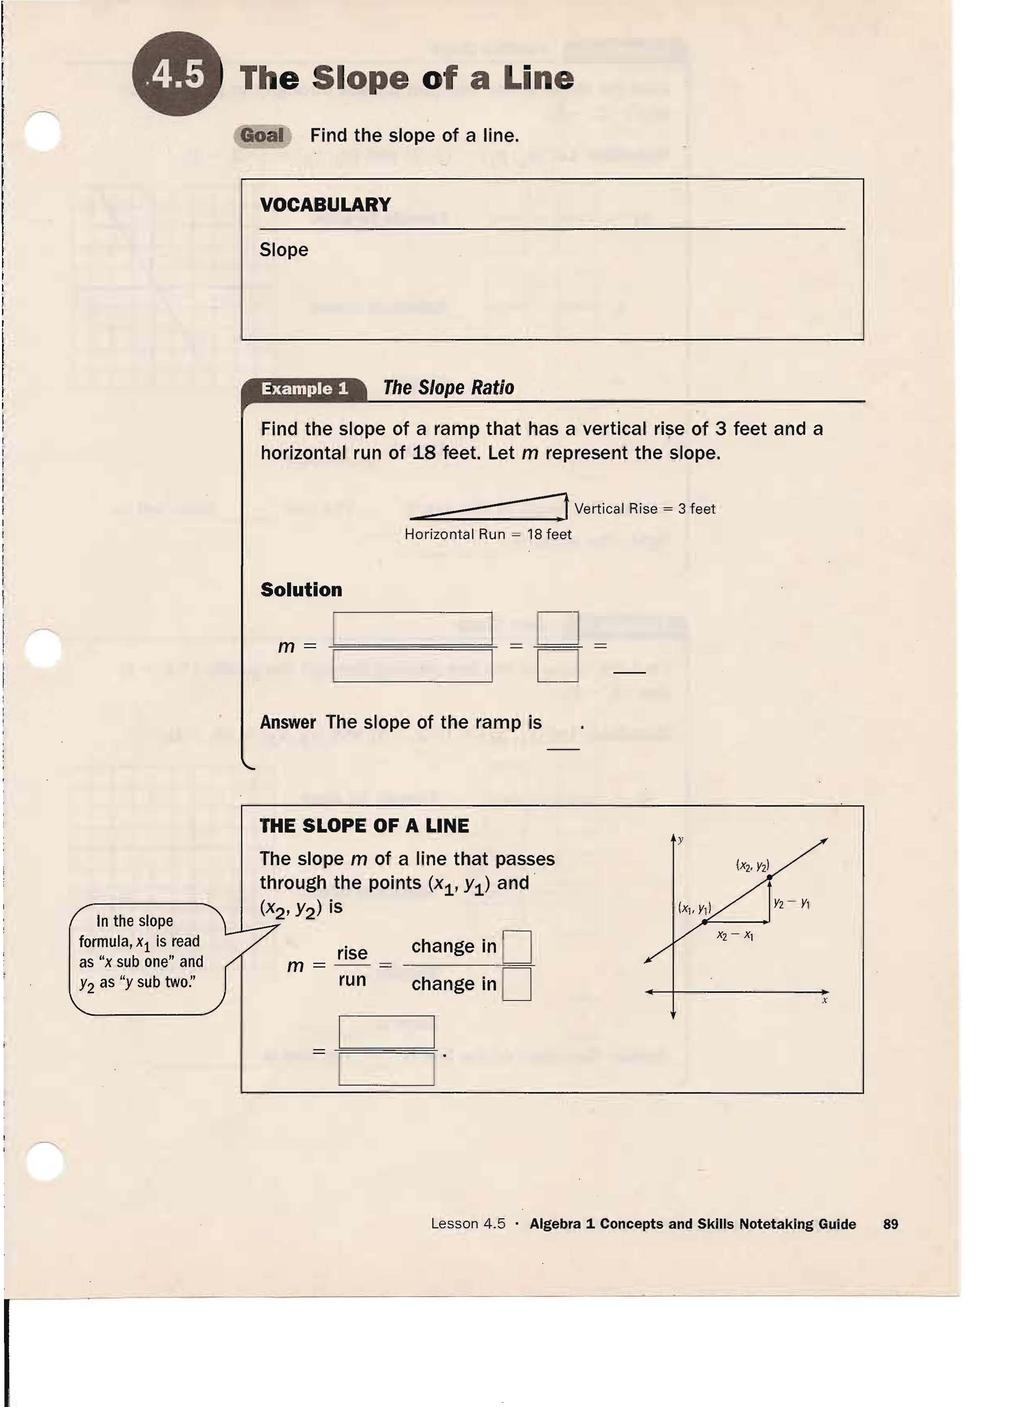 T e Slope of a Line Goal Find the slope of a line. VOCABULARY Slope Example The Slope Ratio Find the slope of a ramp that has a vertical rise of feet and a horizontal run of 8 feet.